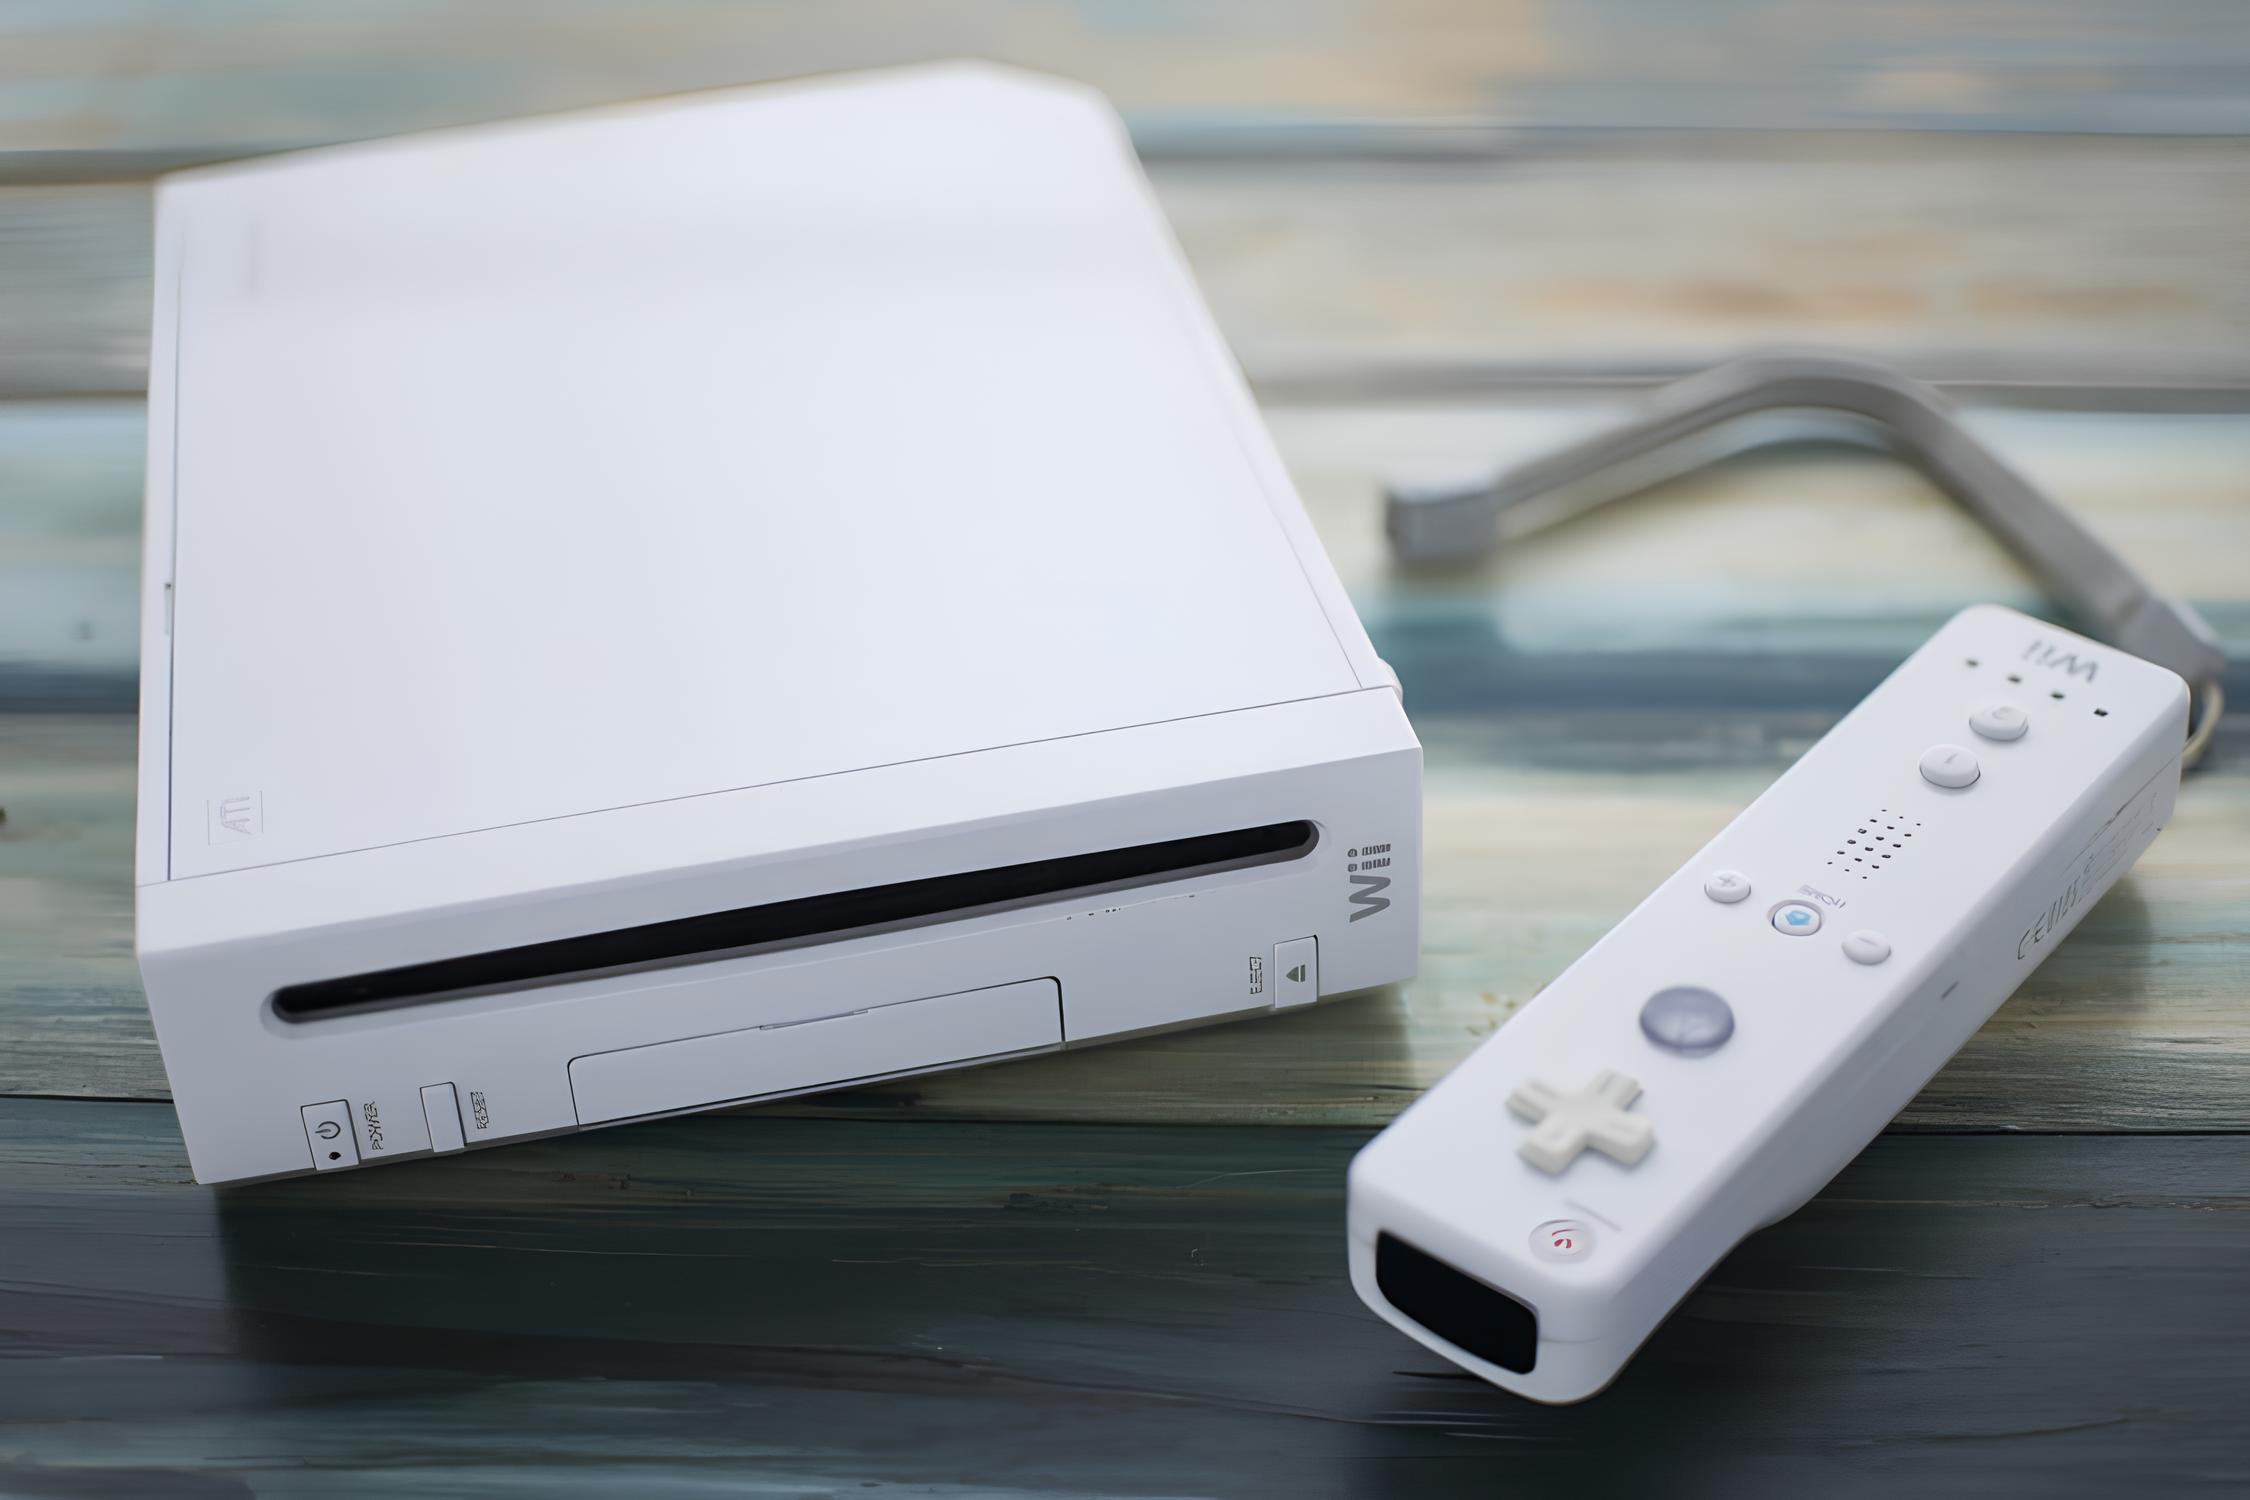 Connecting Wii To Xfinity Wi-Fi Hotspot: Quick Steps